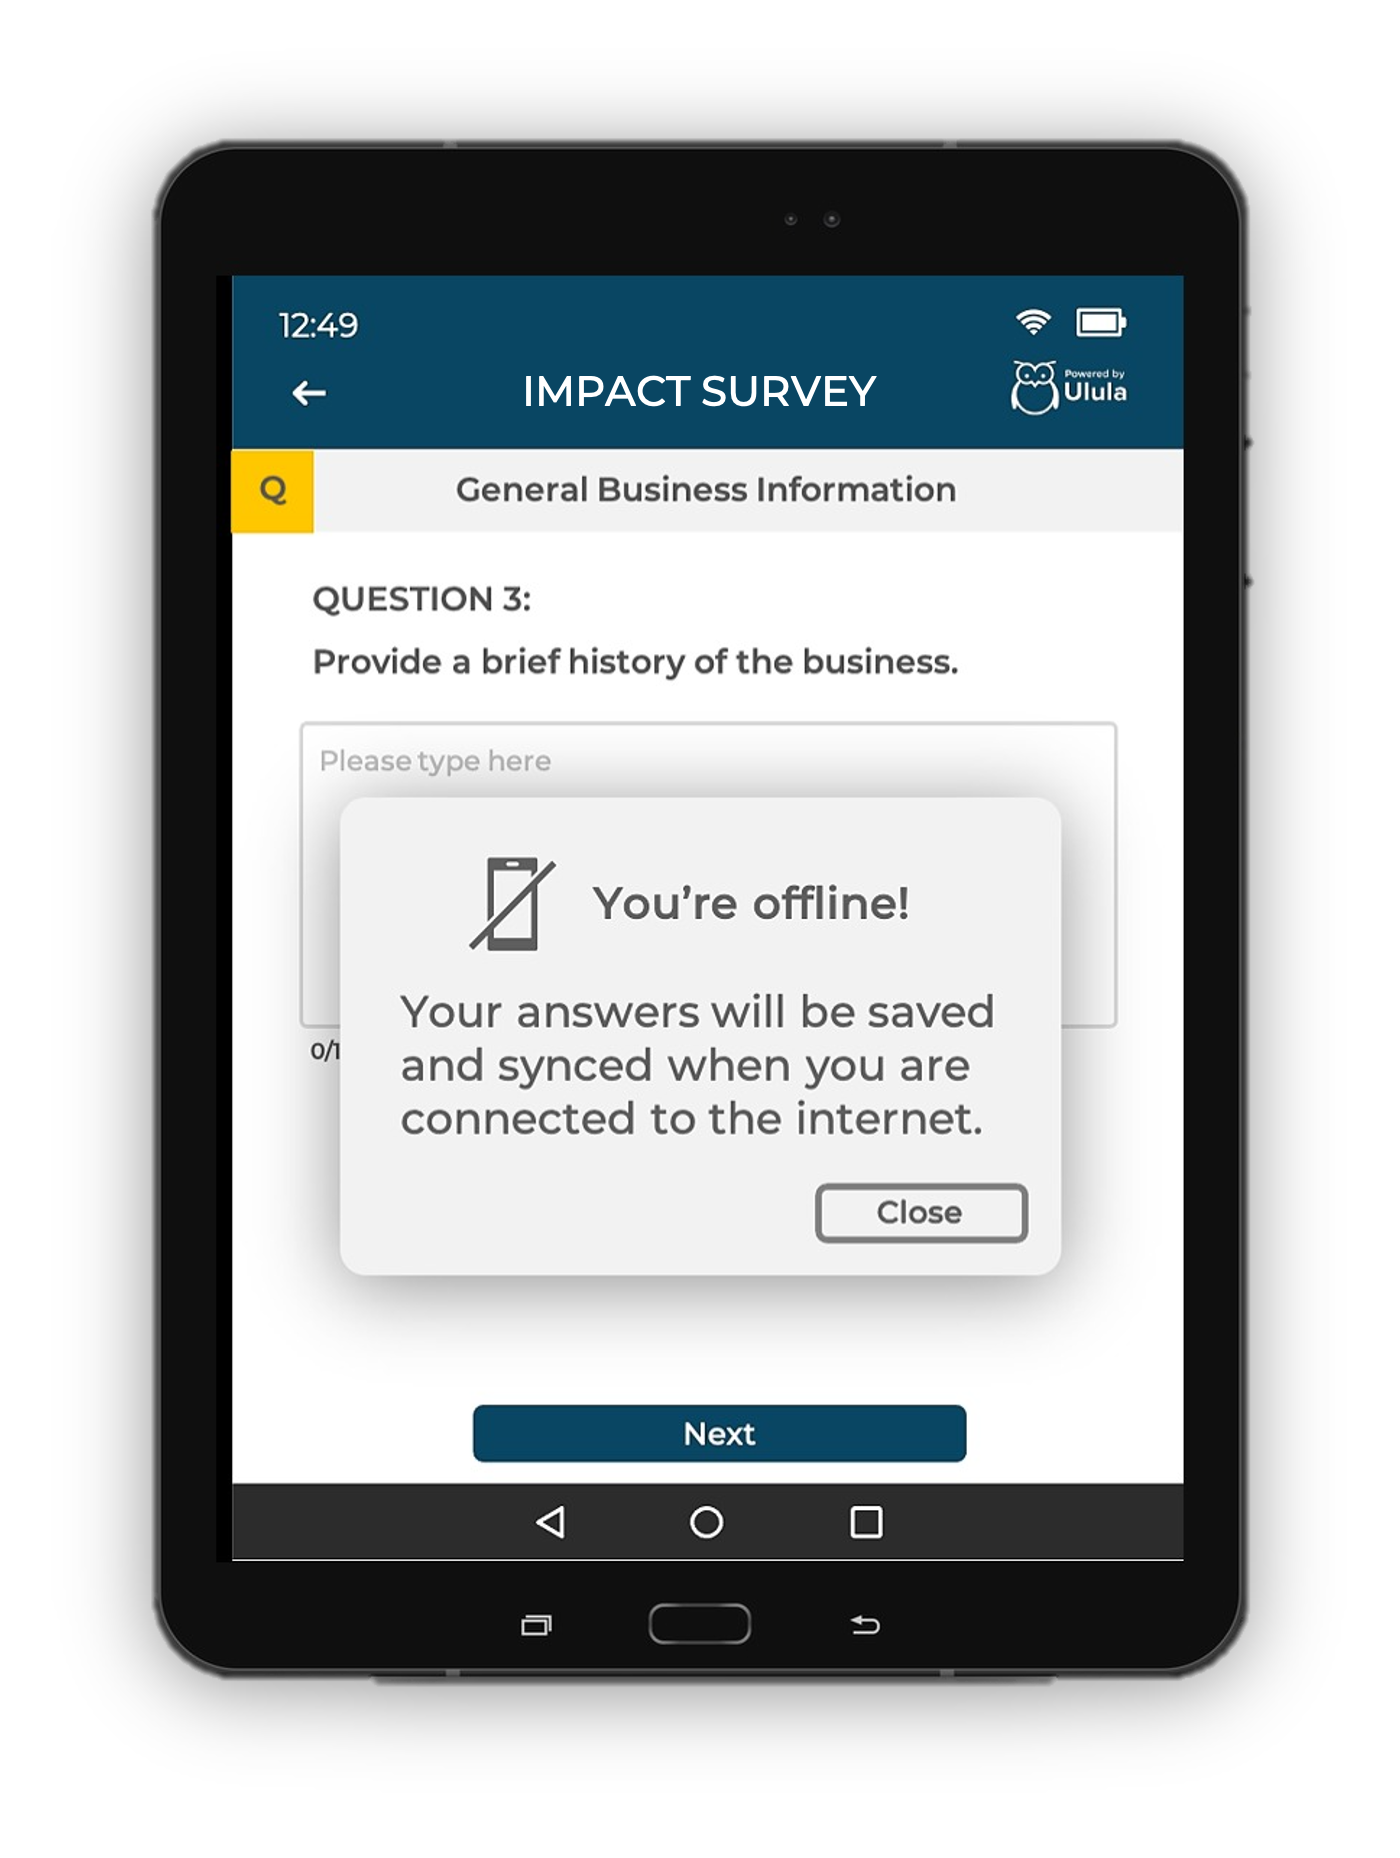 Android tablet showing a survey question from Ulula's Owlyfield app with a pop-up message notifying that the user is offline